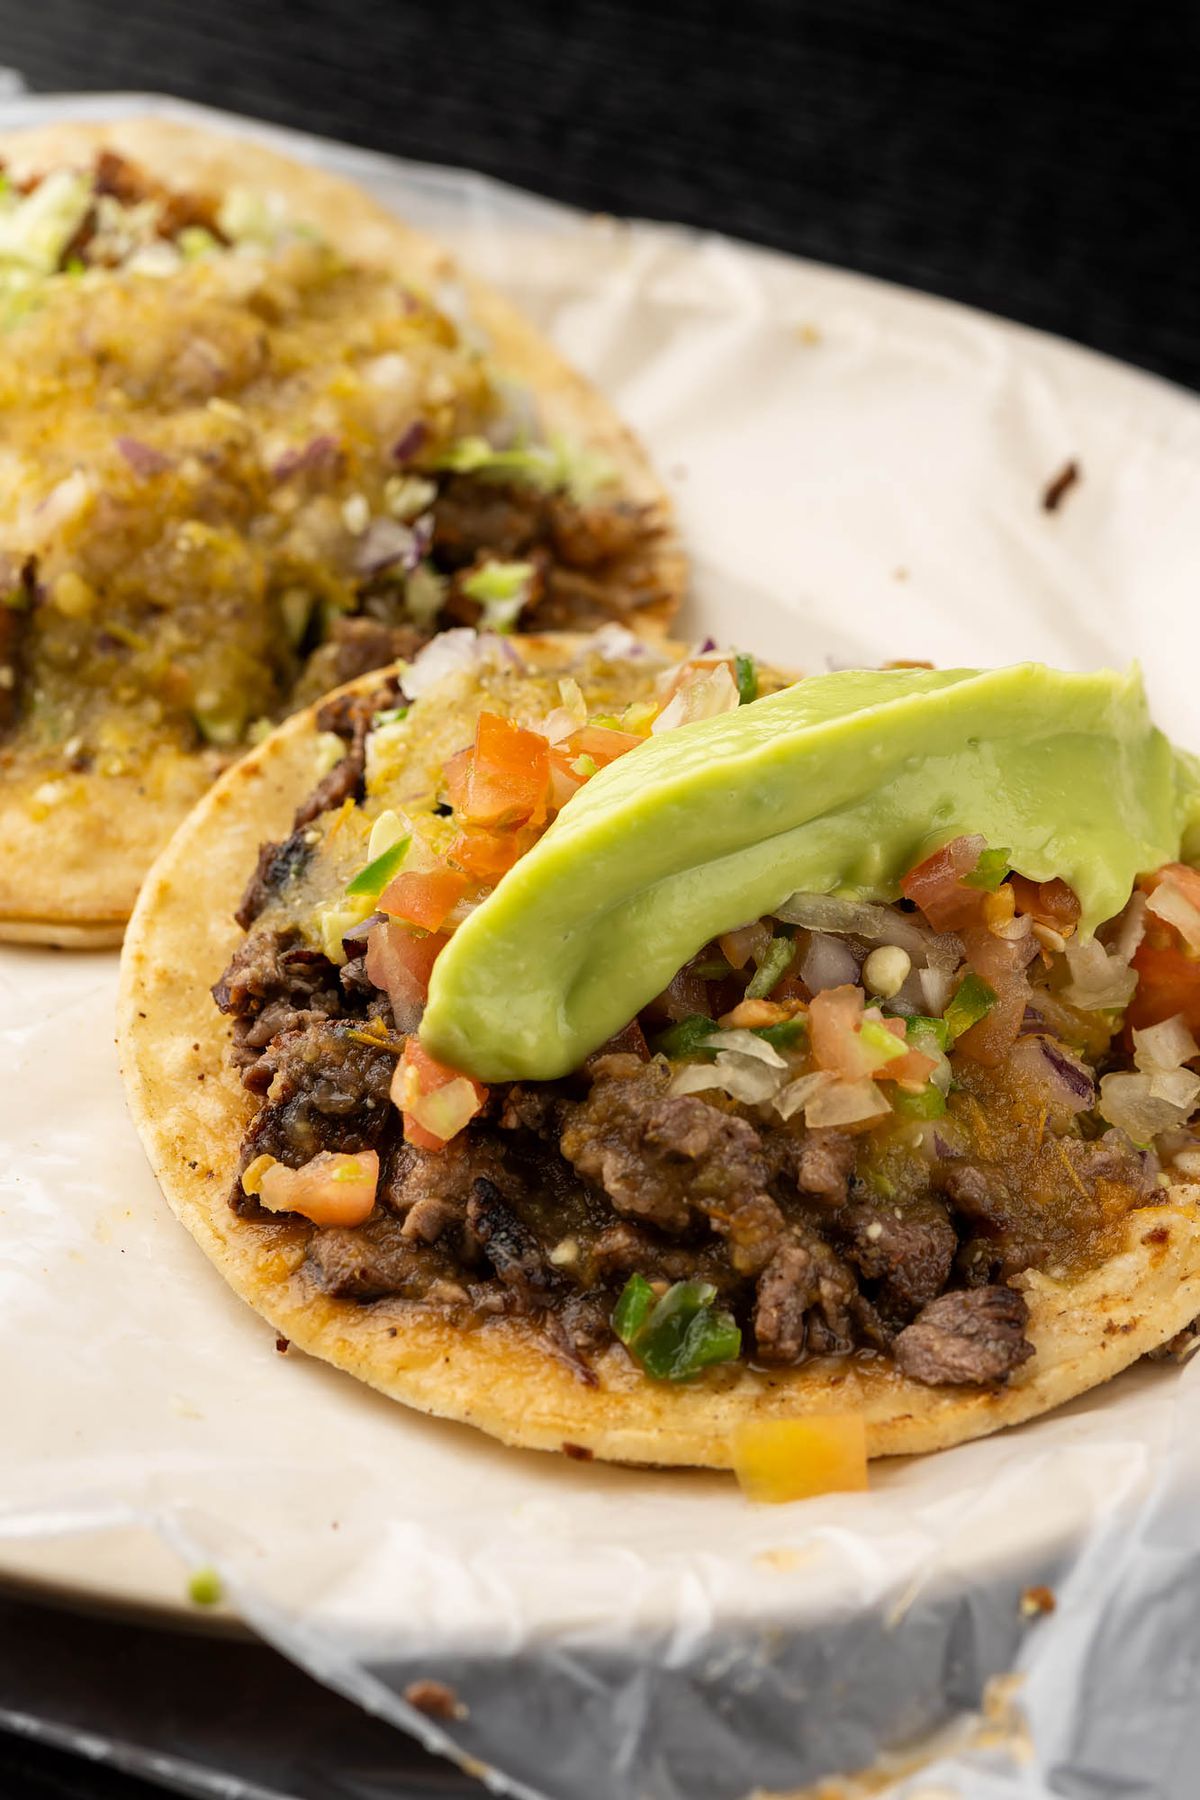 A grilled beef taco with guacamole.